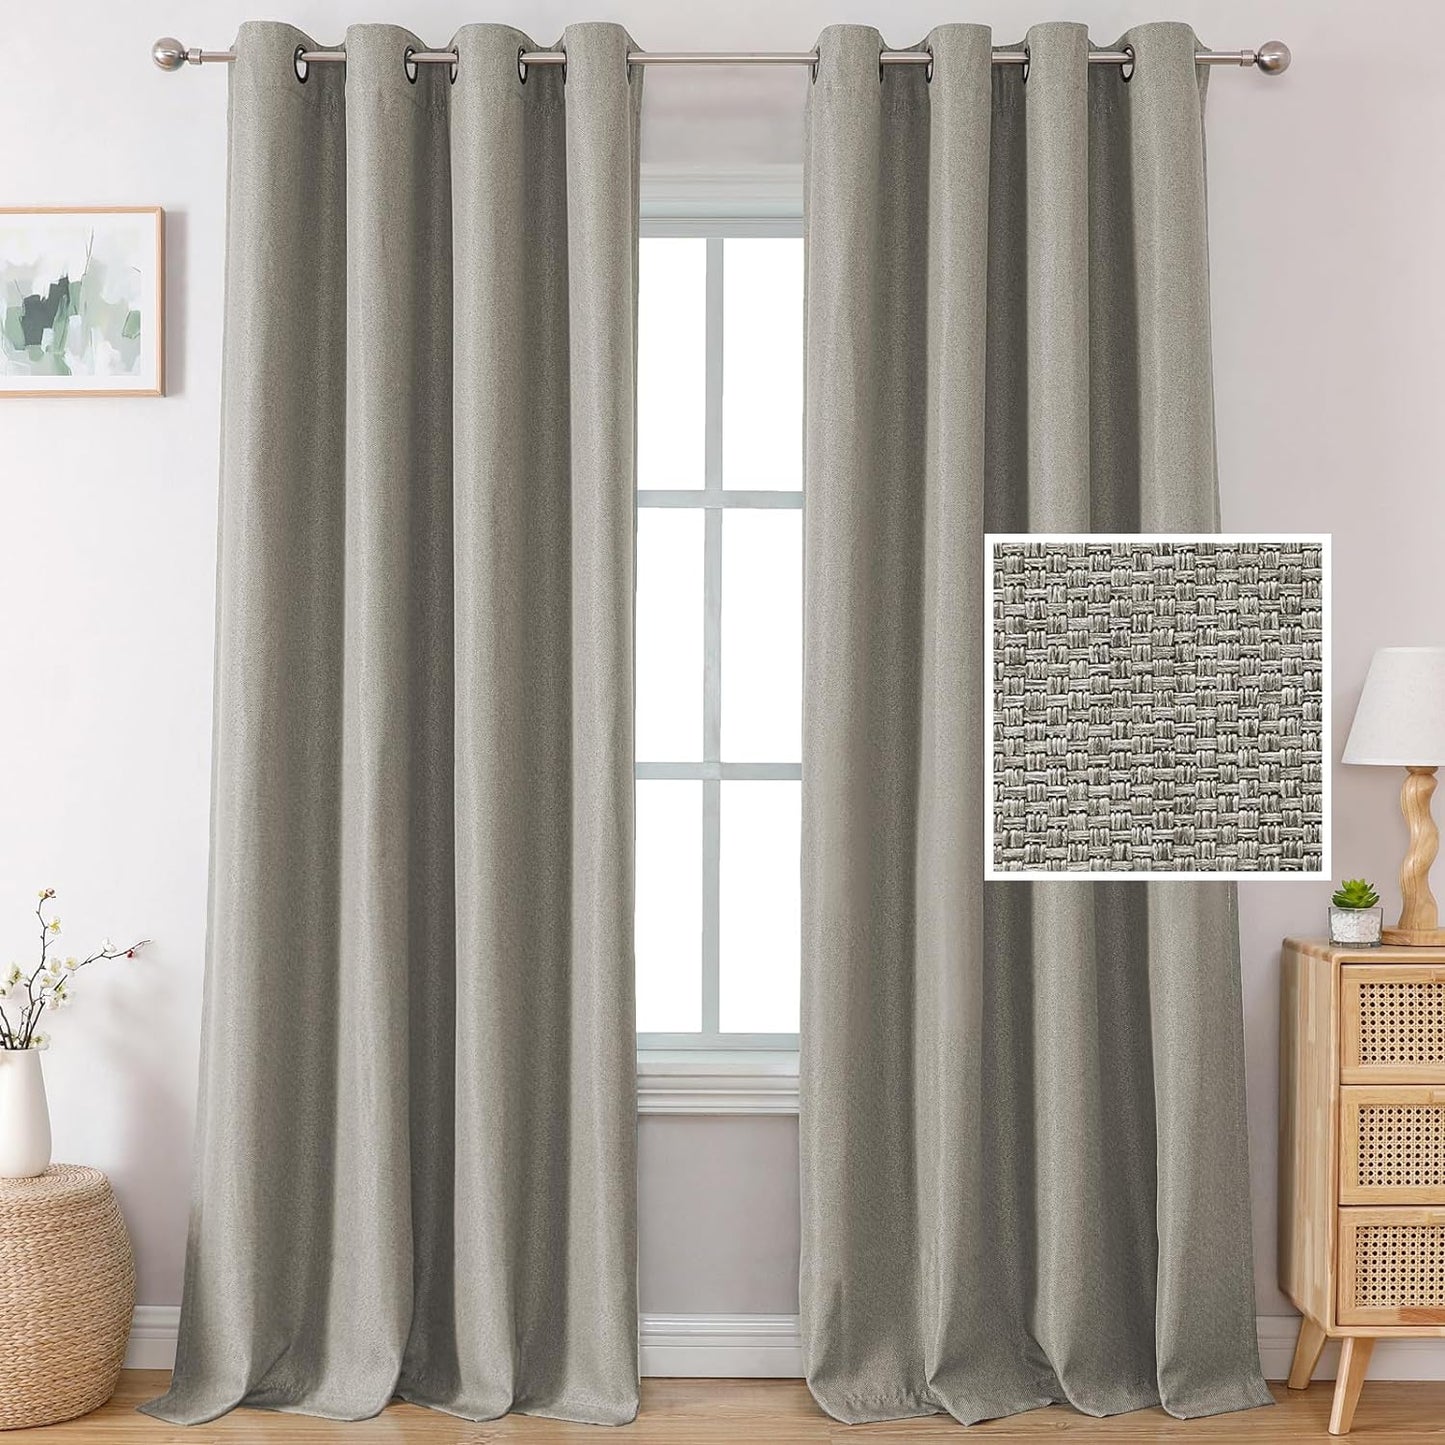 H.VERSAILTEX Linen Blackout Curtains 84 Inches Long Thermal Insulated Room Darkening Linen Curtains for Bedroom Textured Burlap Grommet Window Curtains for Living Room, Bluestone and Taupe, 2 Panels  H.VERSAILTEX Taupe 52"W X 96"L 